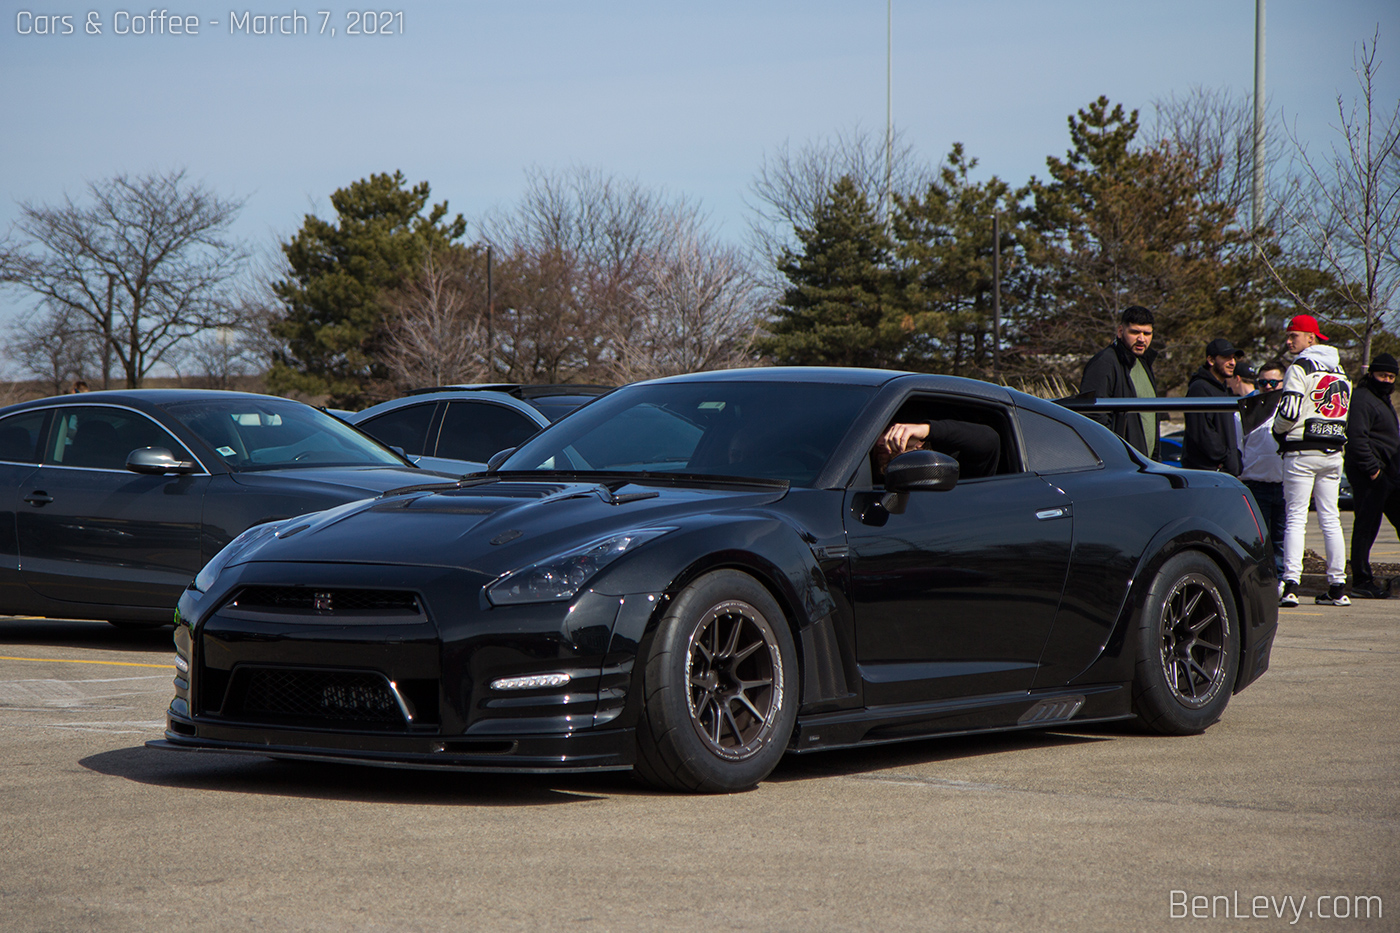 Black Nissan GT-R with Fat Tires